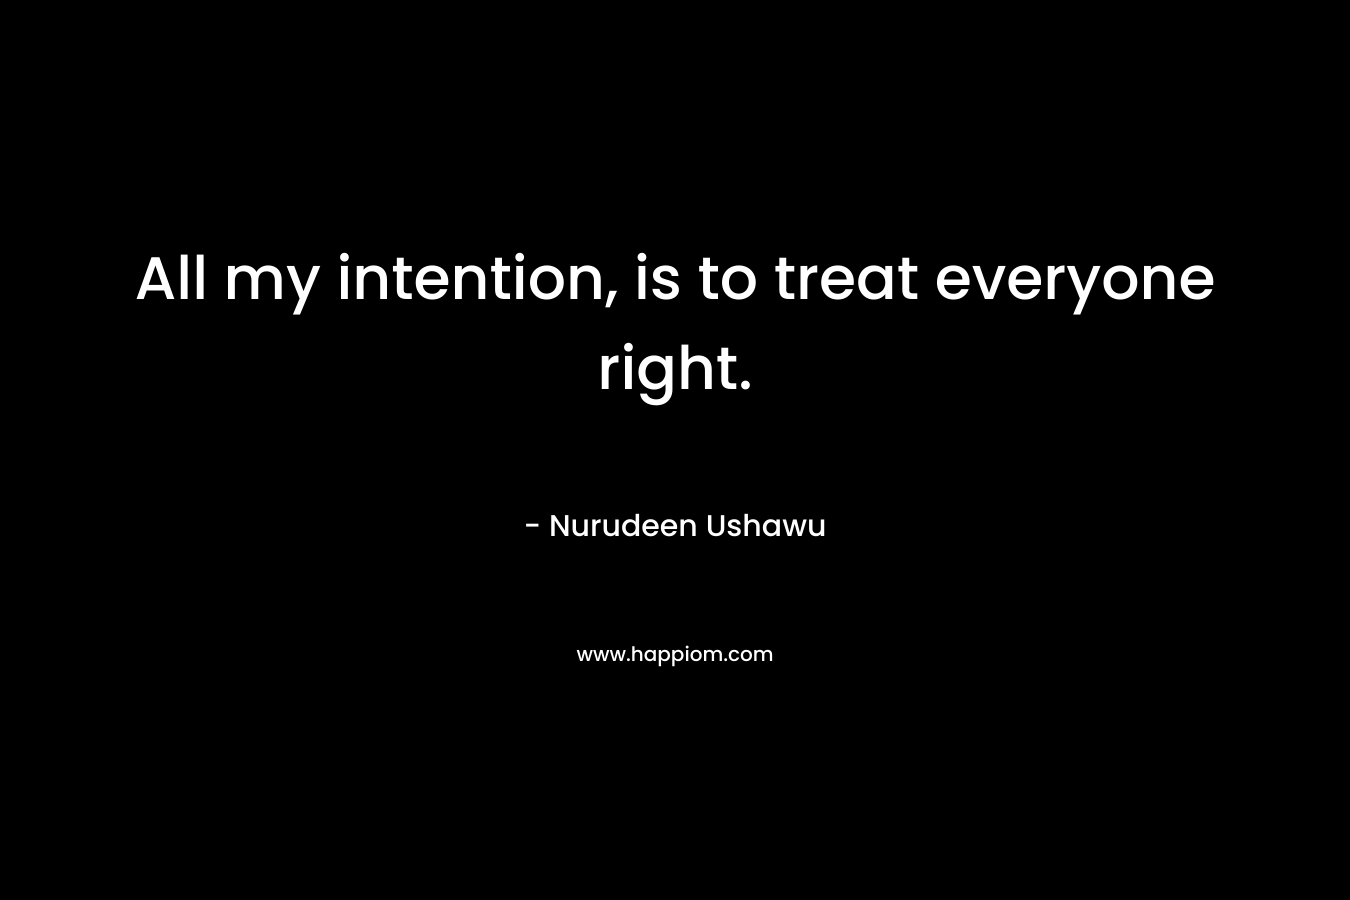 All my intention, is to treat everyone right. – Nurudeen Ushawu